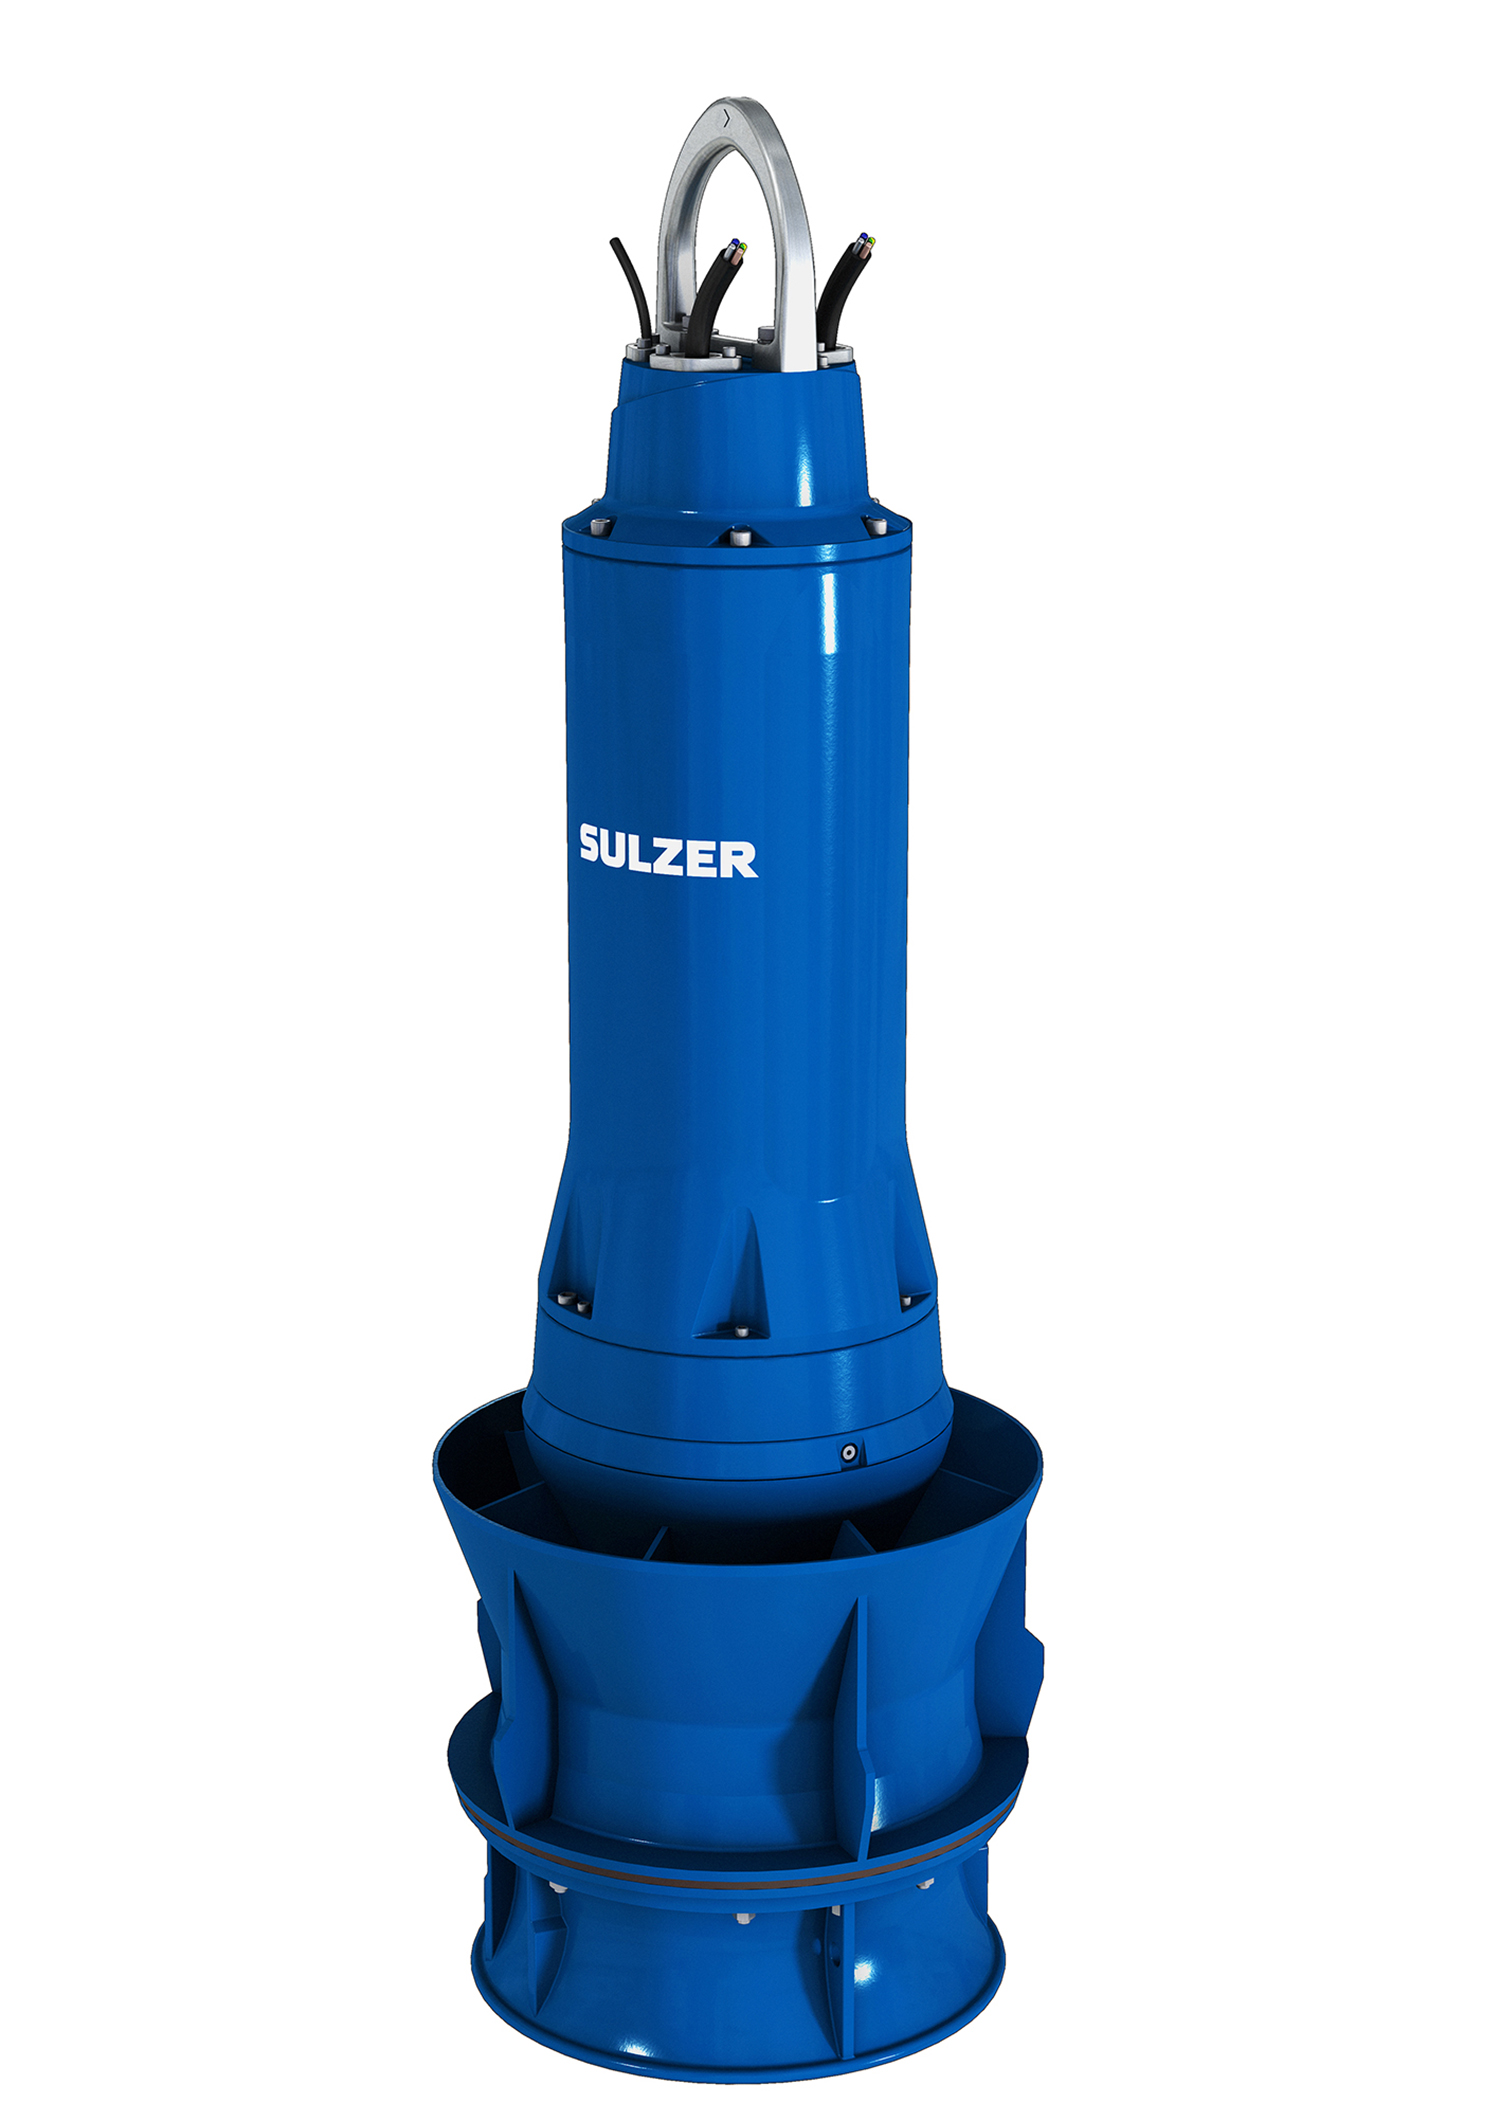 Seven Sulzer VUPX peak load pumps will be installed in the new pumping stations.